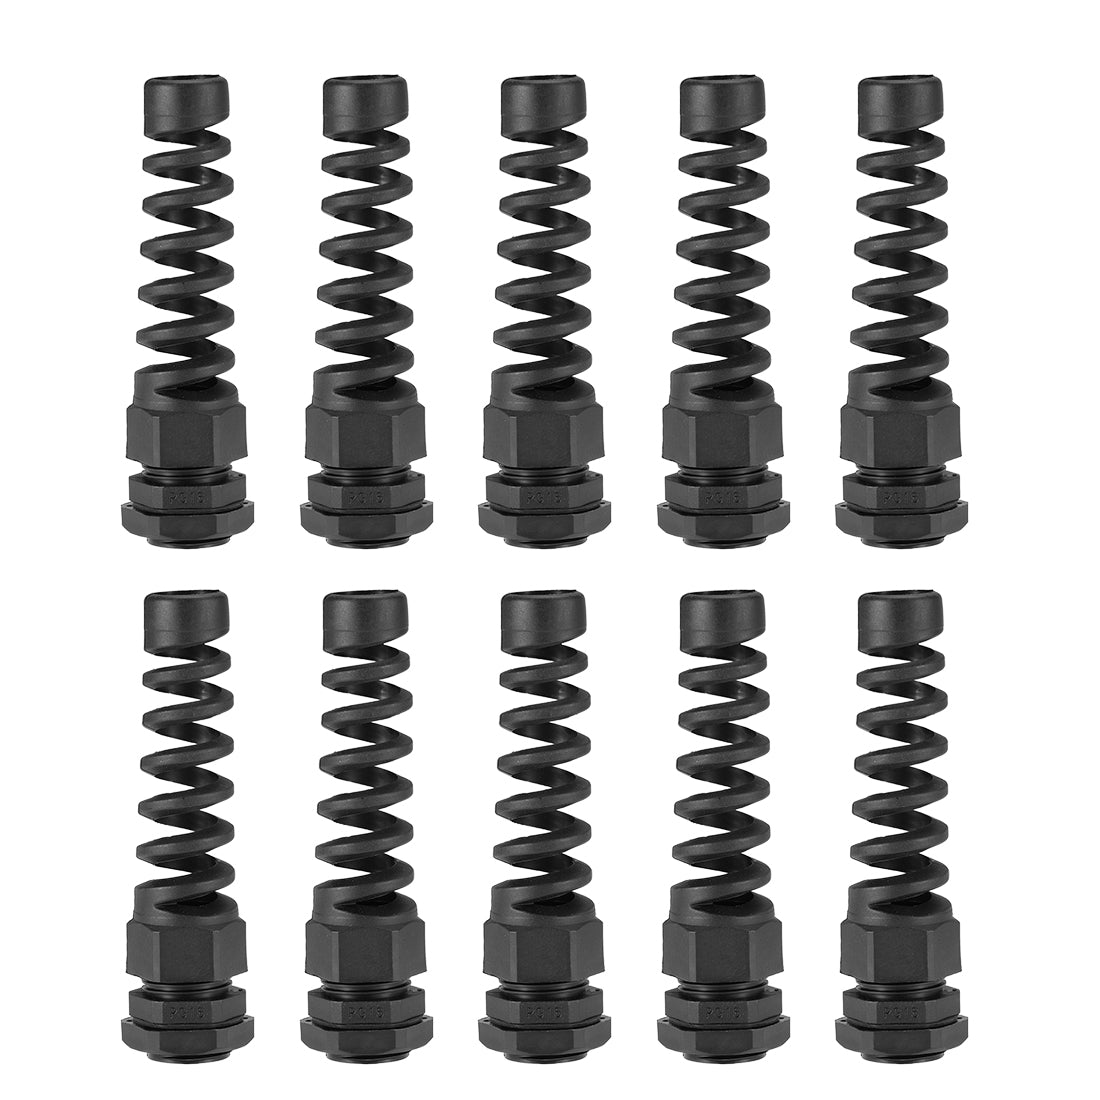 uxcell Uxcell PG16 Cable Gland 10mm-13mm Wire Hole Waterproof Nylon Joint Adjustable Locknut with Strain Relief Black 10pcs